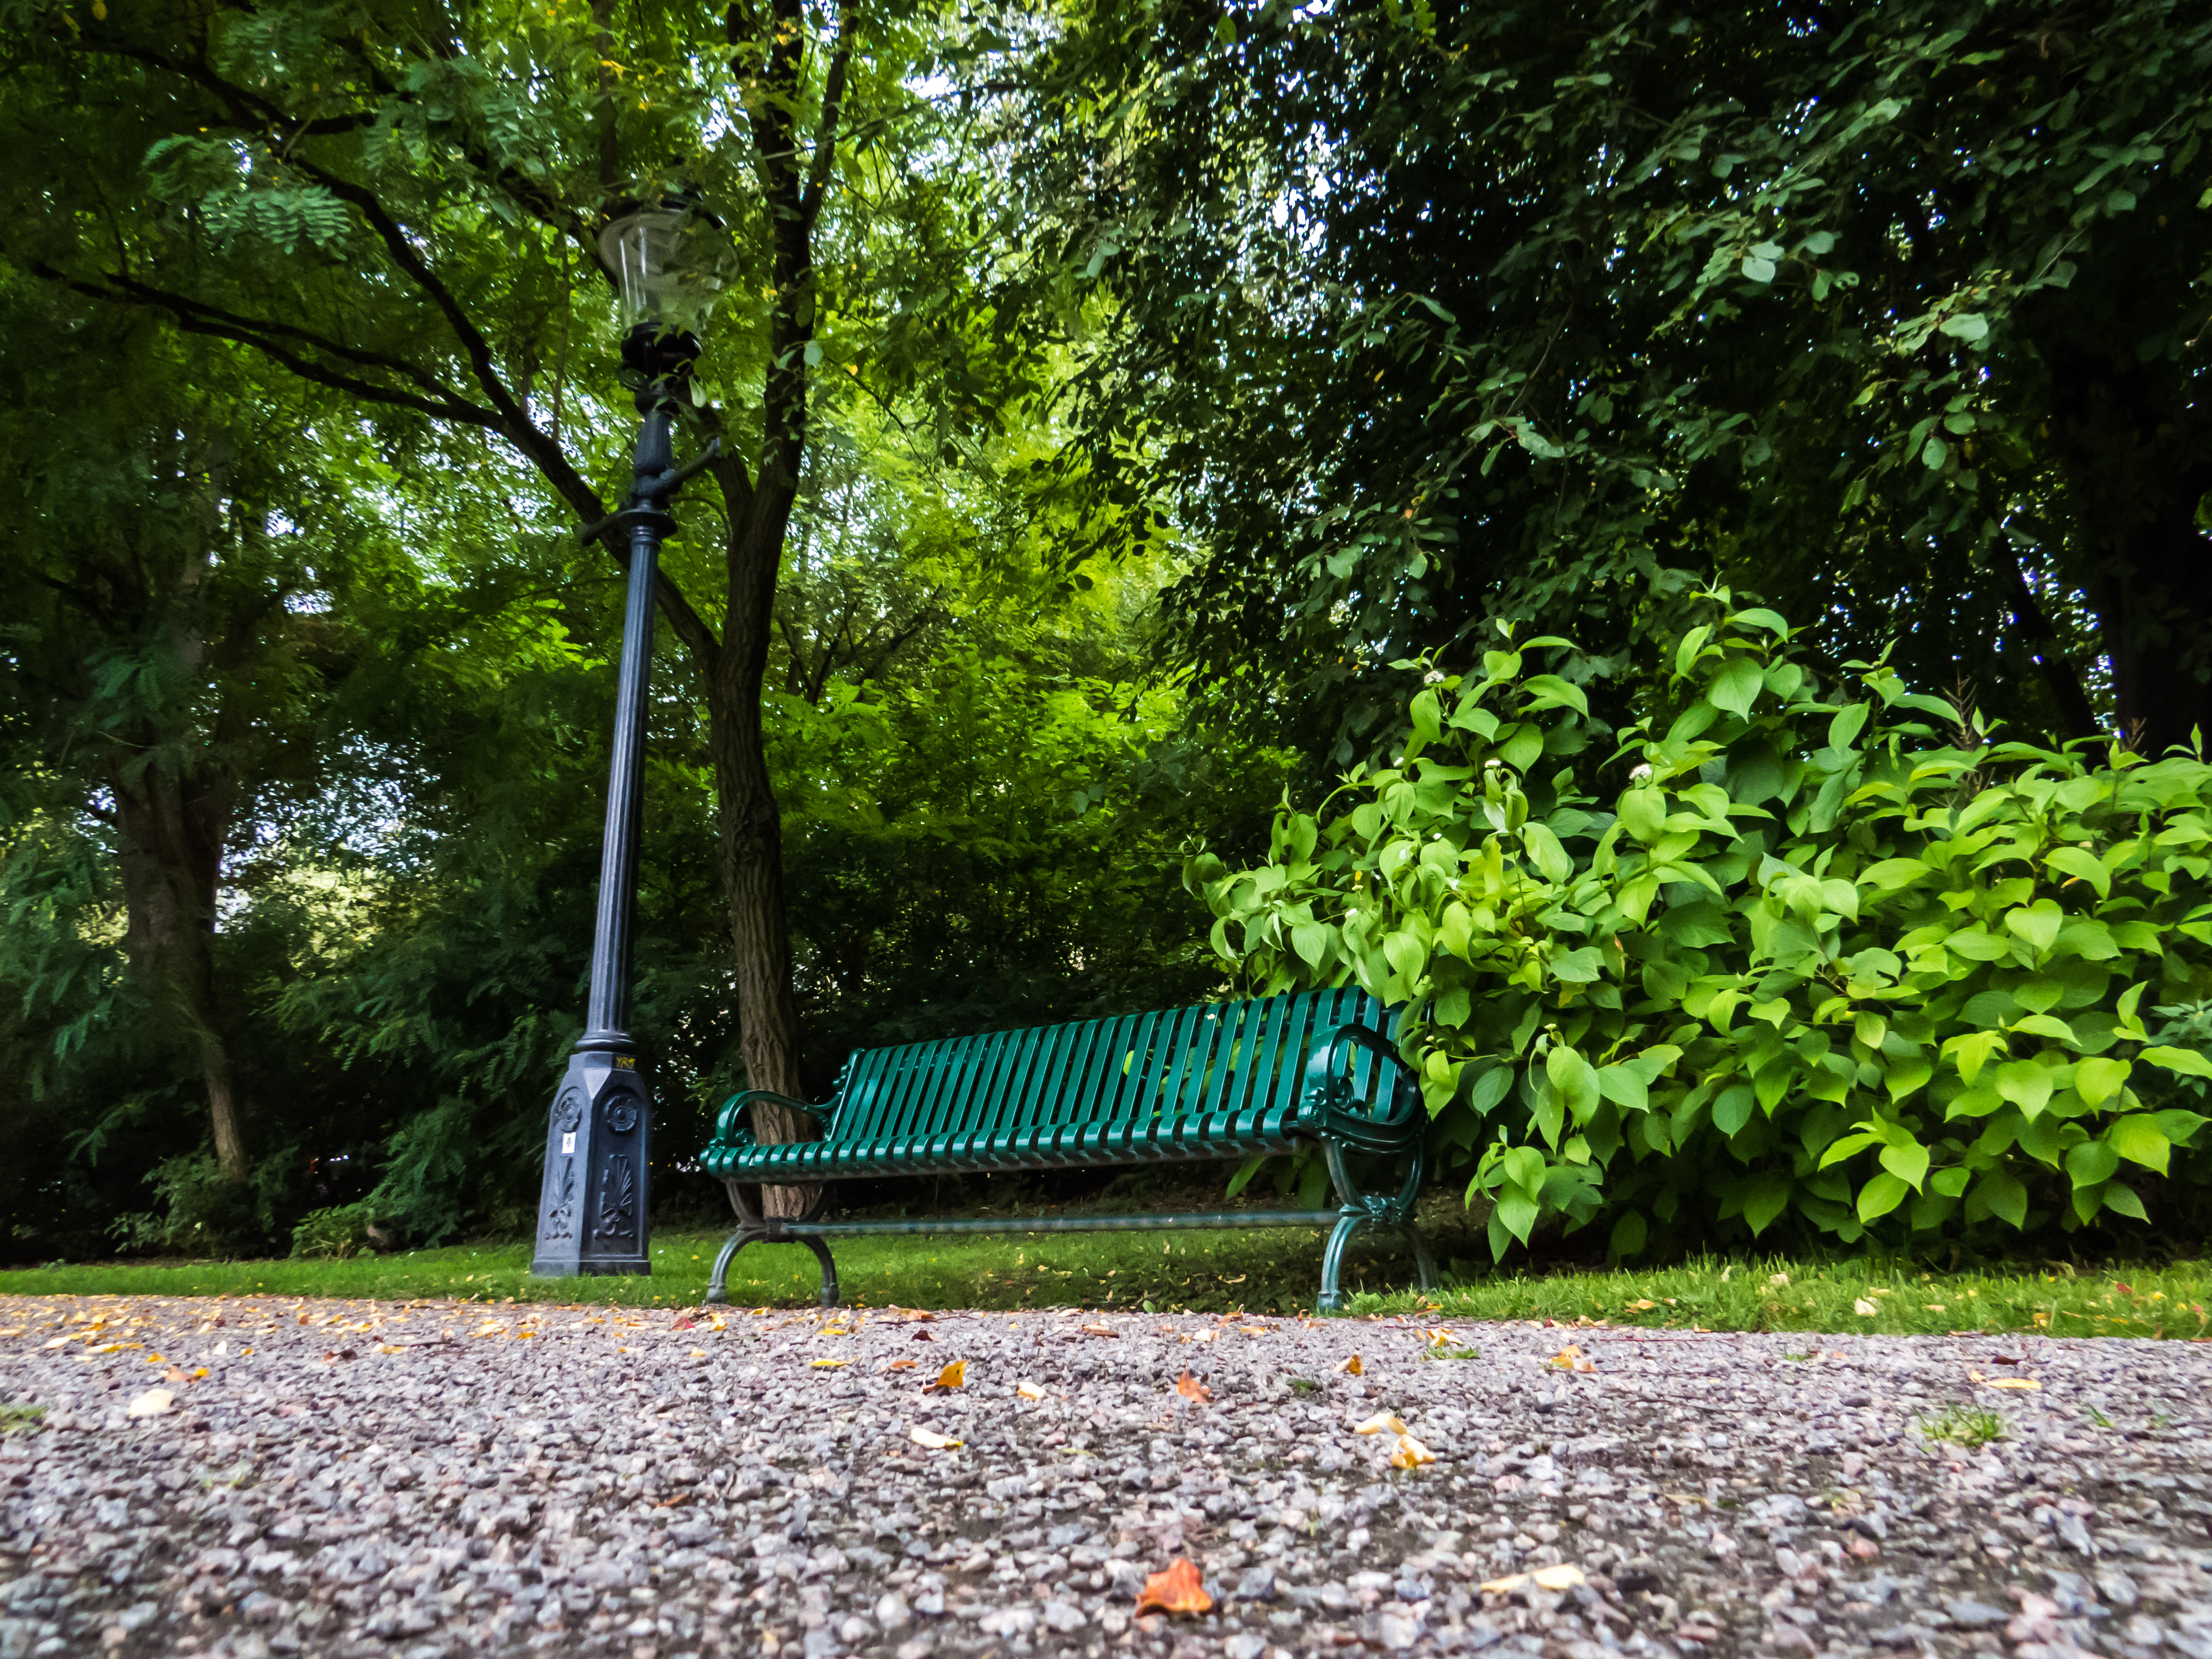 Bench in the park photo